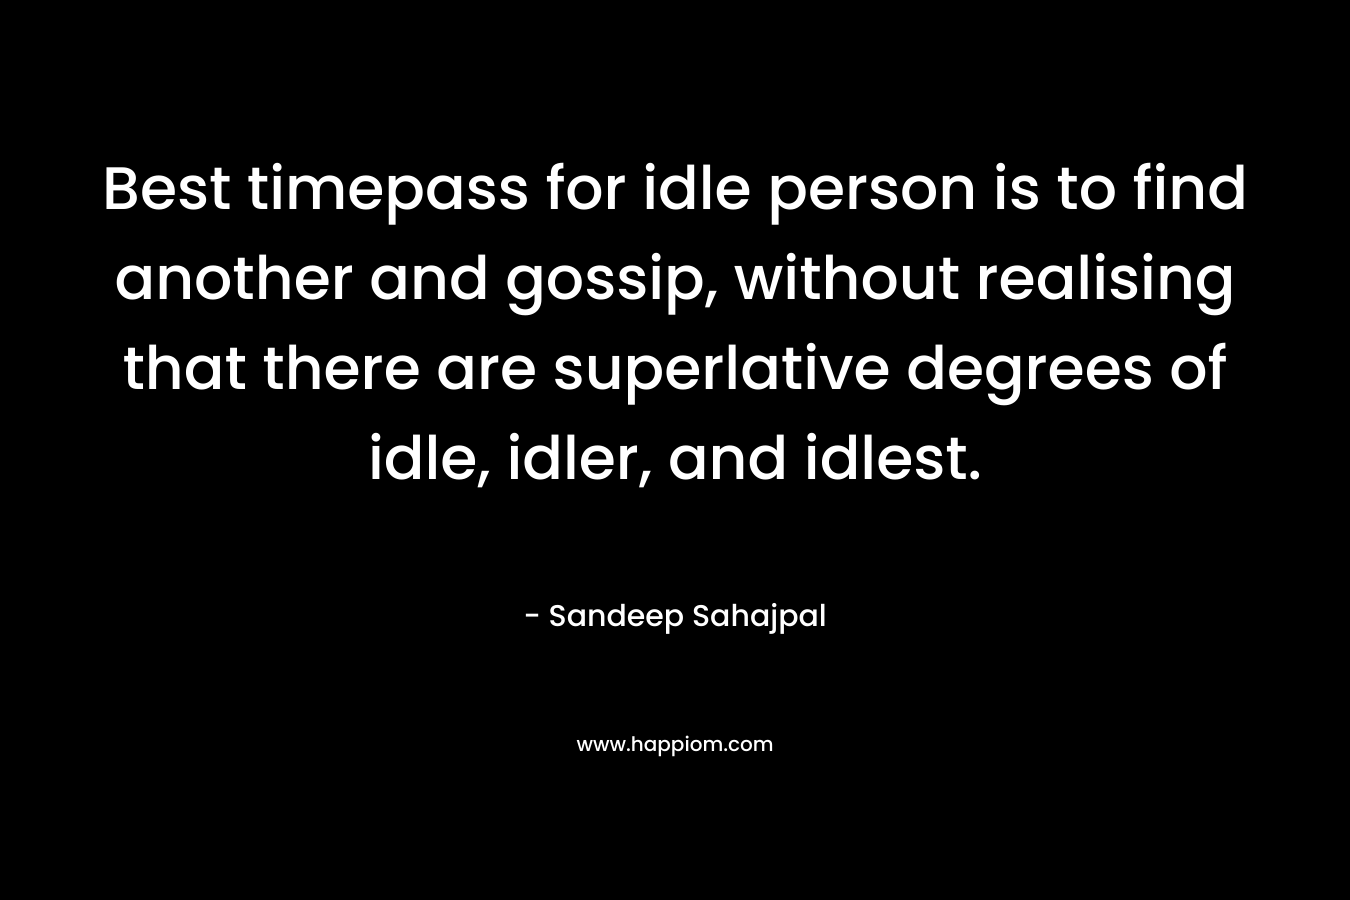 Best timepass for idle person is to find another and gossip, without realising that there are superlative degrees of idle, idler, and idlest.